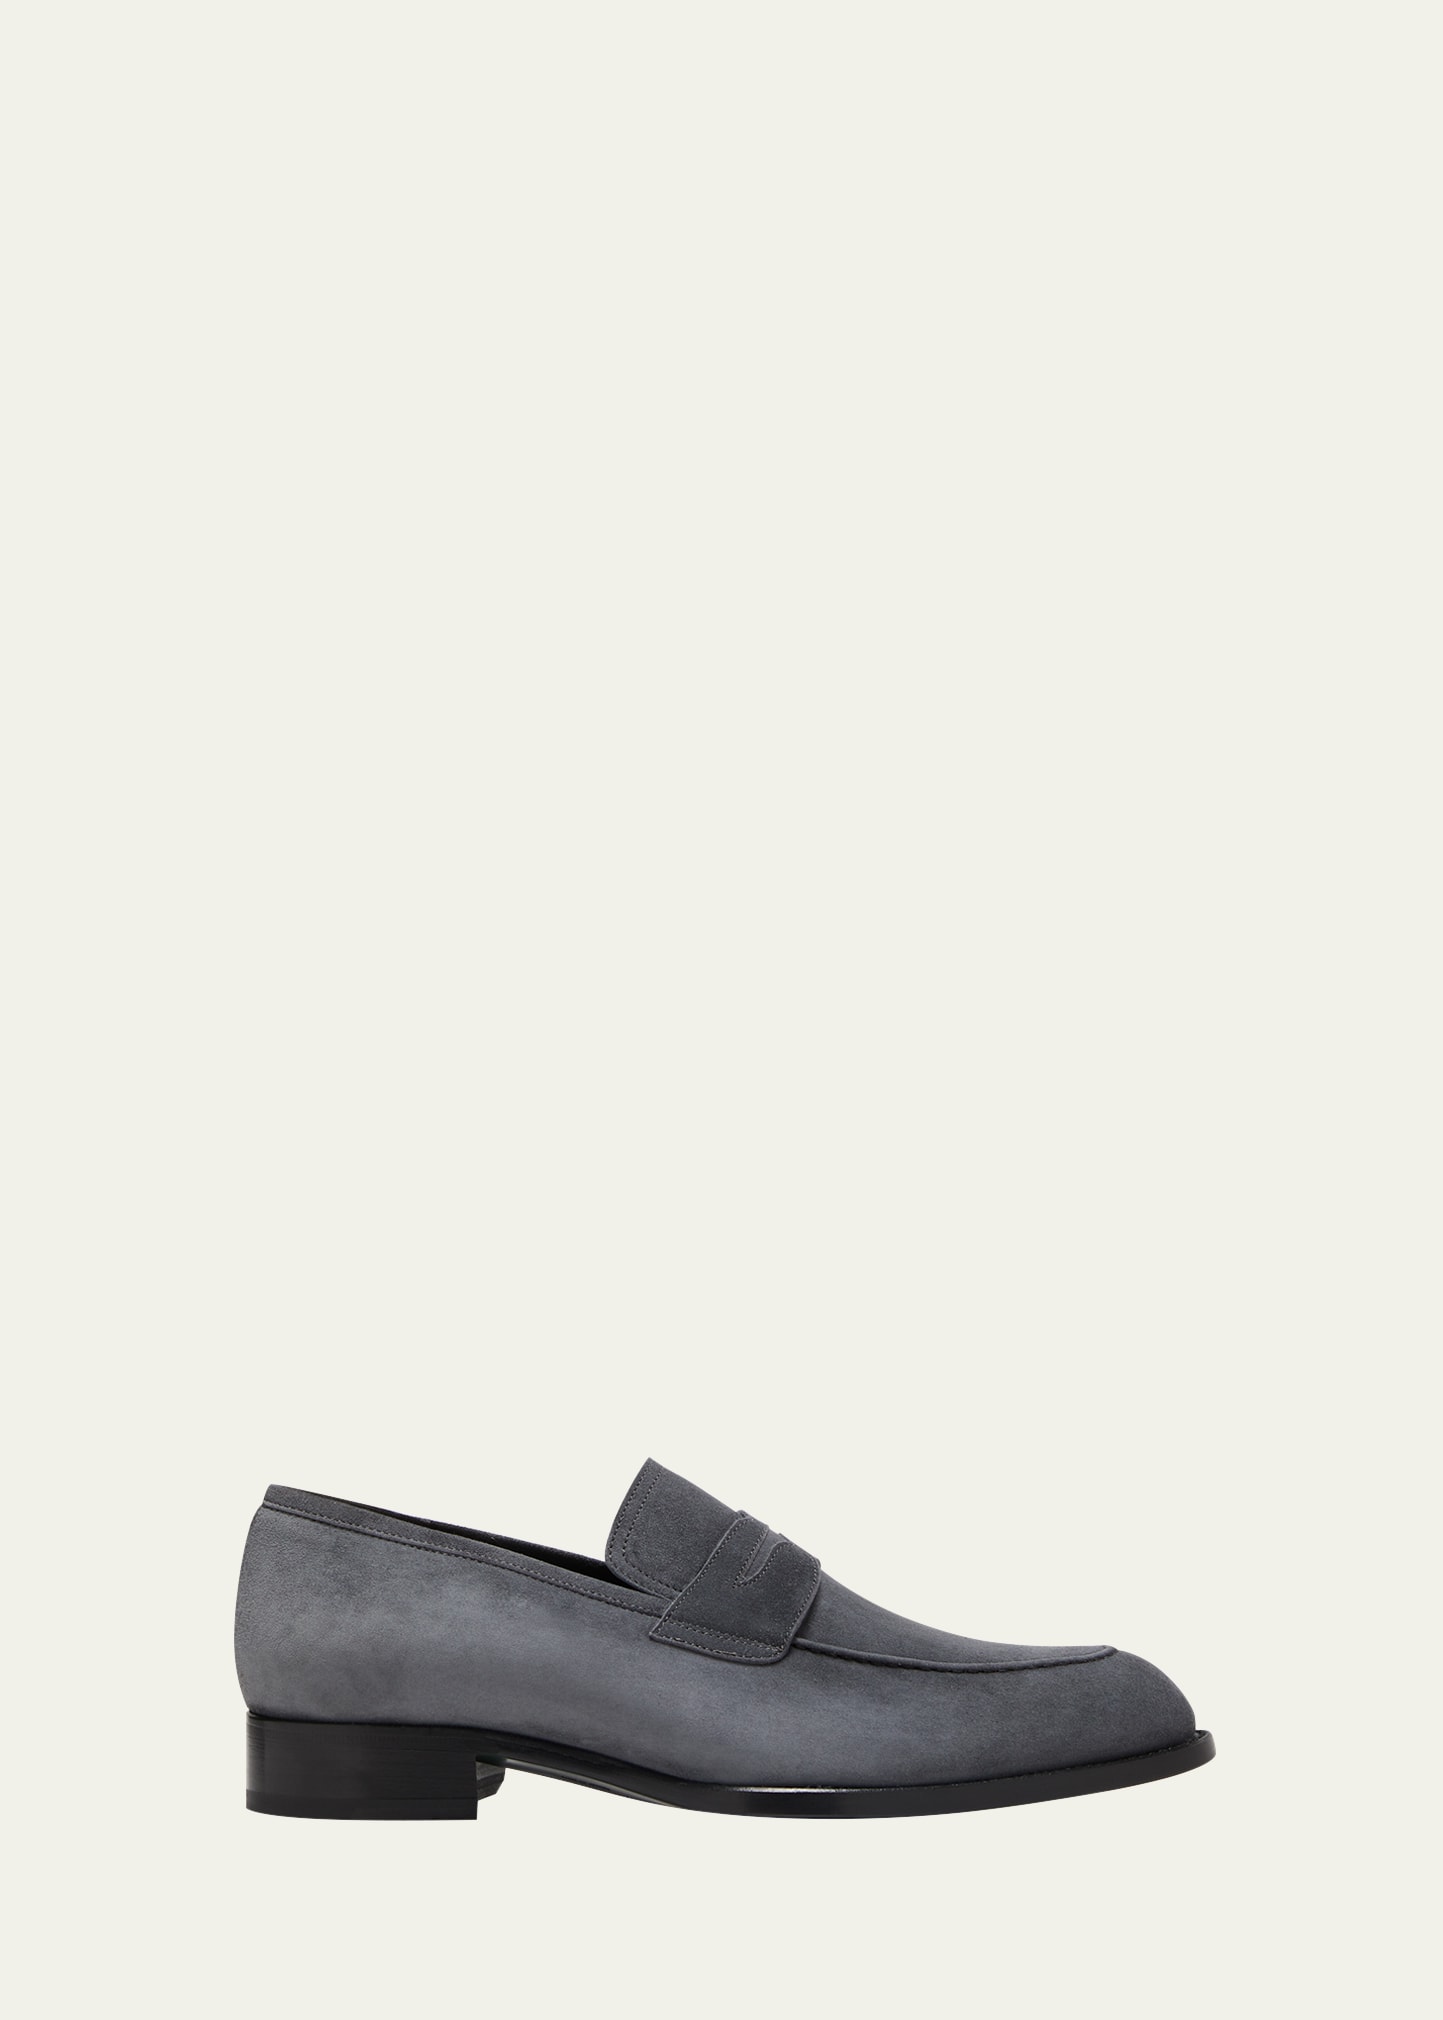 Brioni Men's Suede Penny Loafers In Graphite